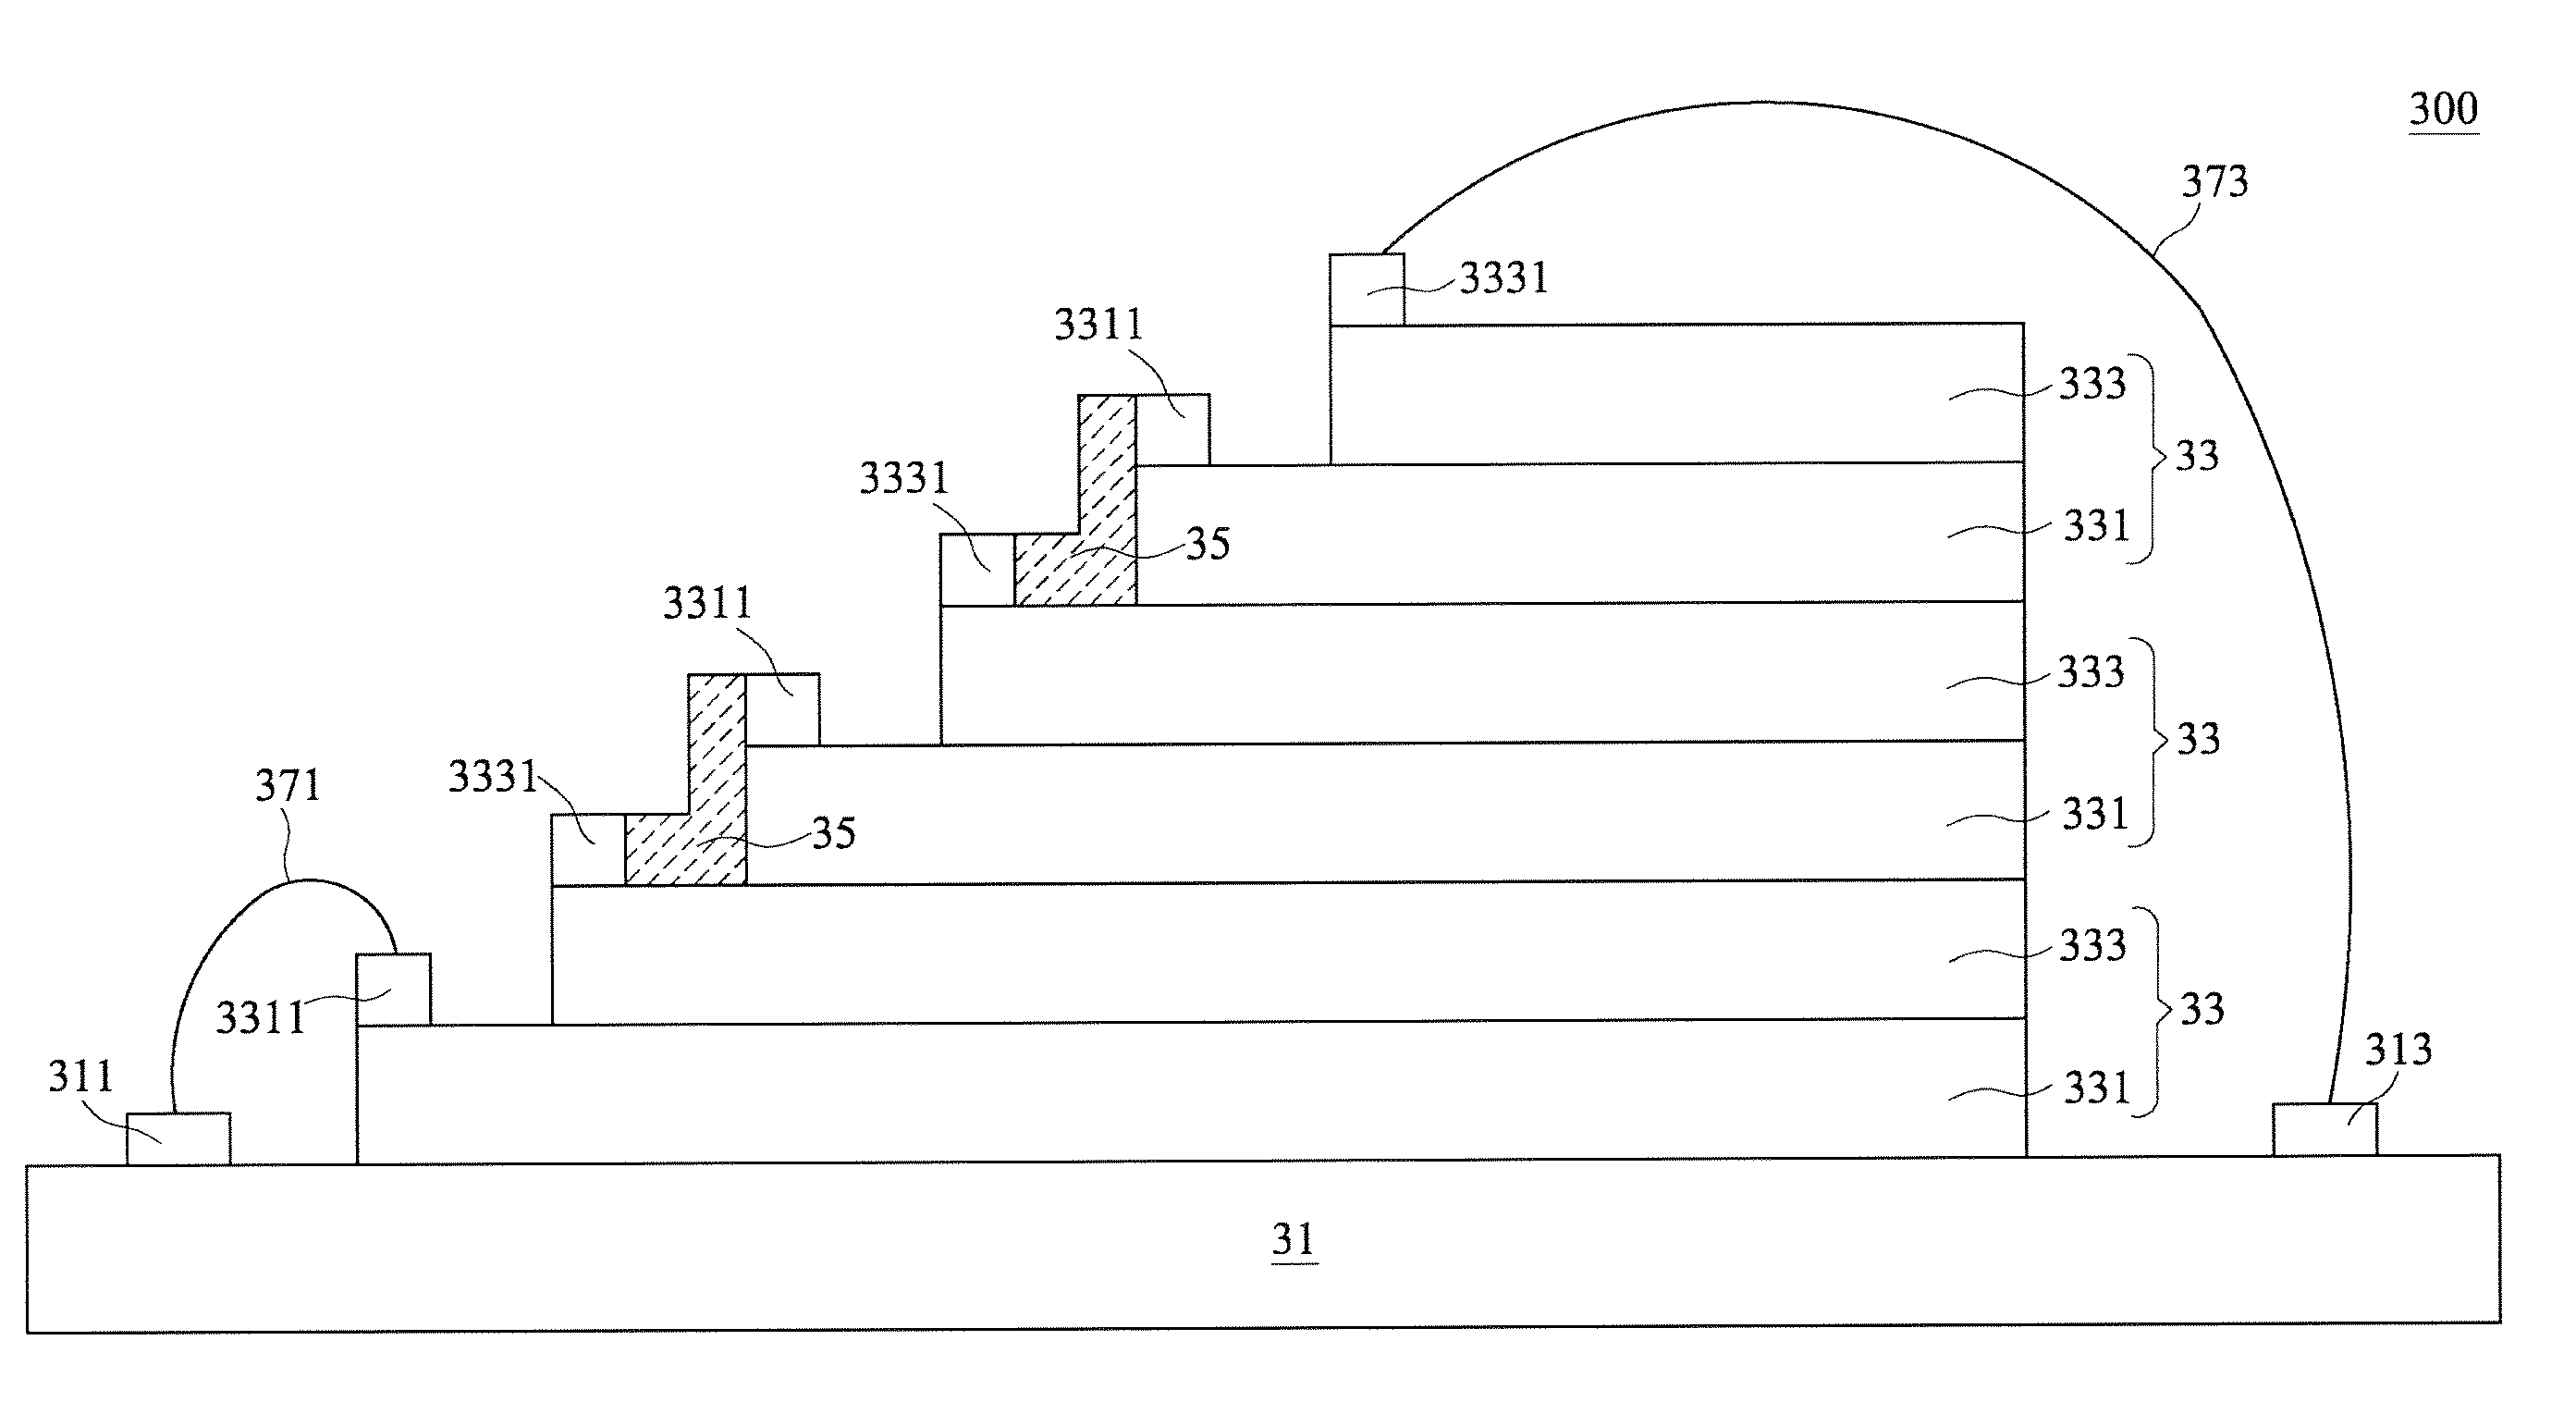 Stacked light emitting diode array structure